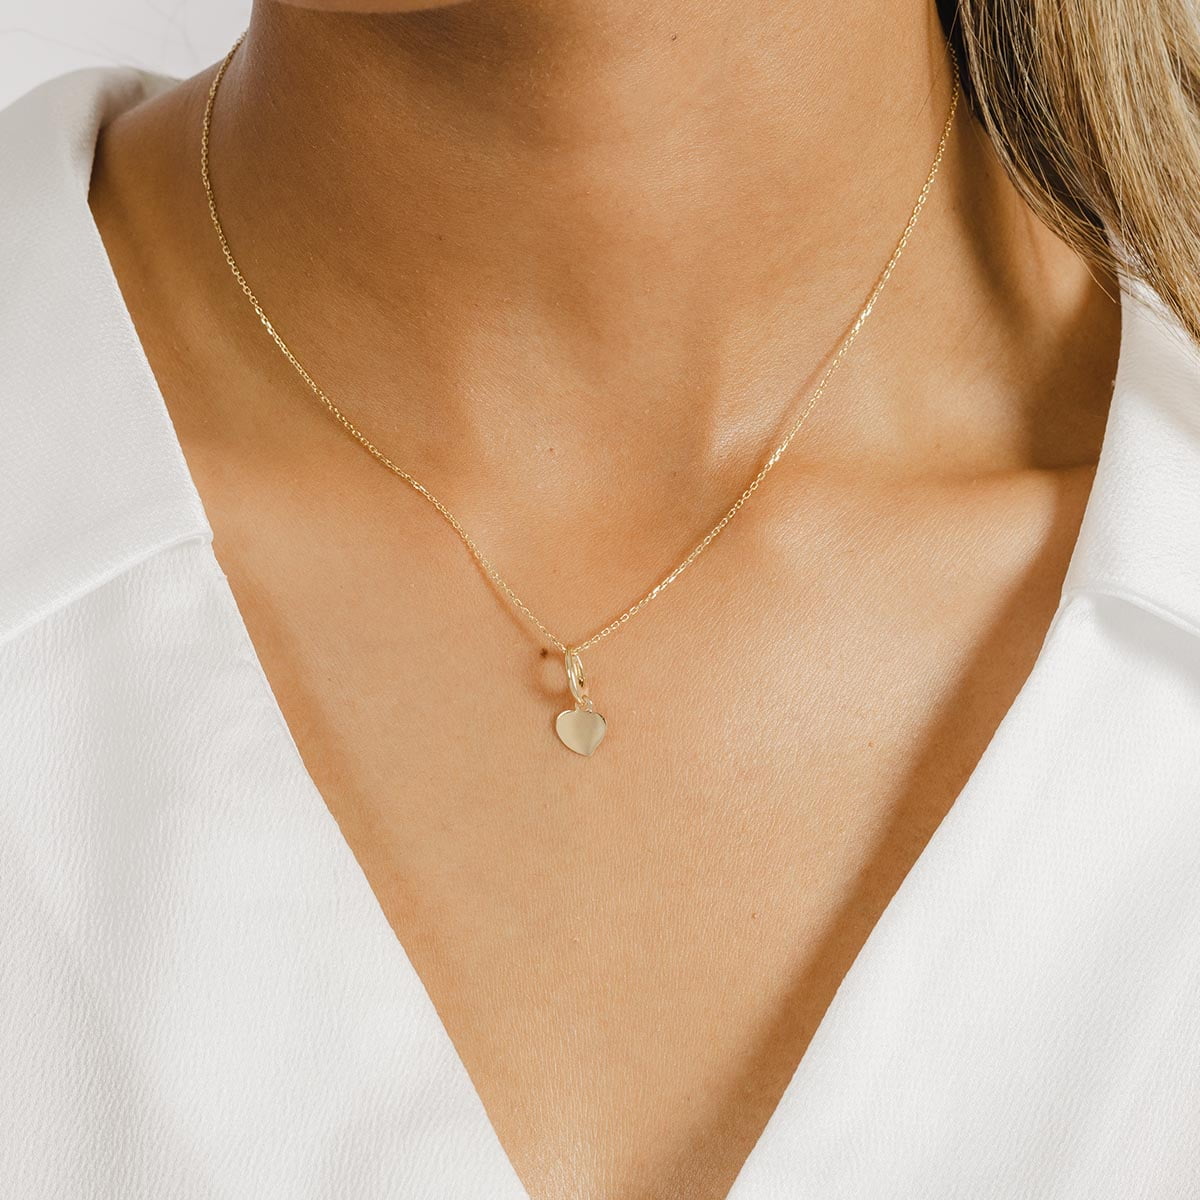 18ct Yellow Gold Heart Charm Pendant Necklace